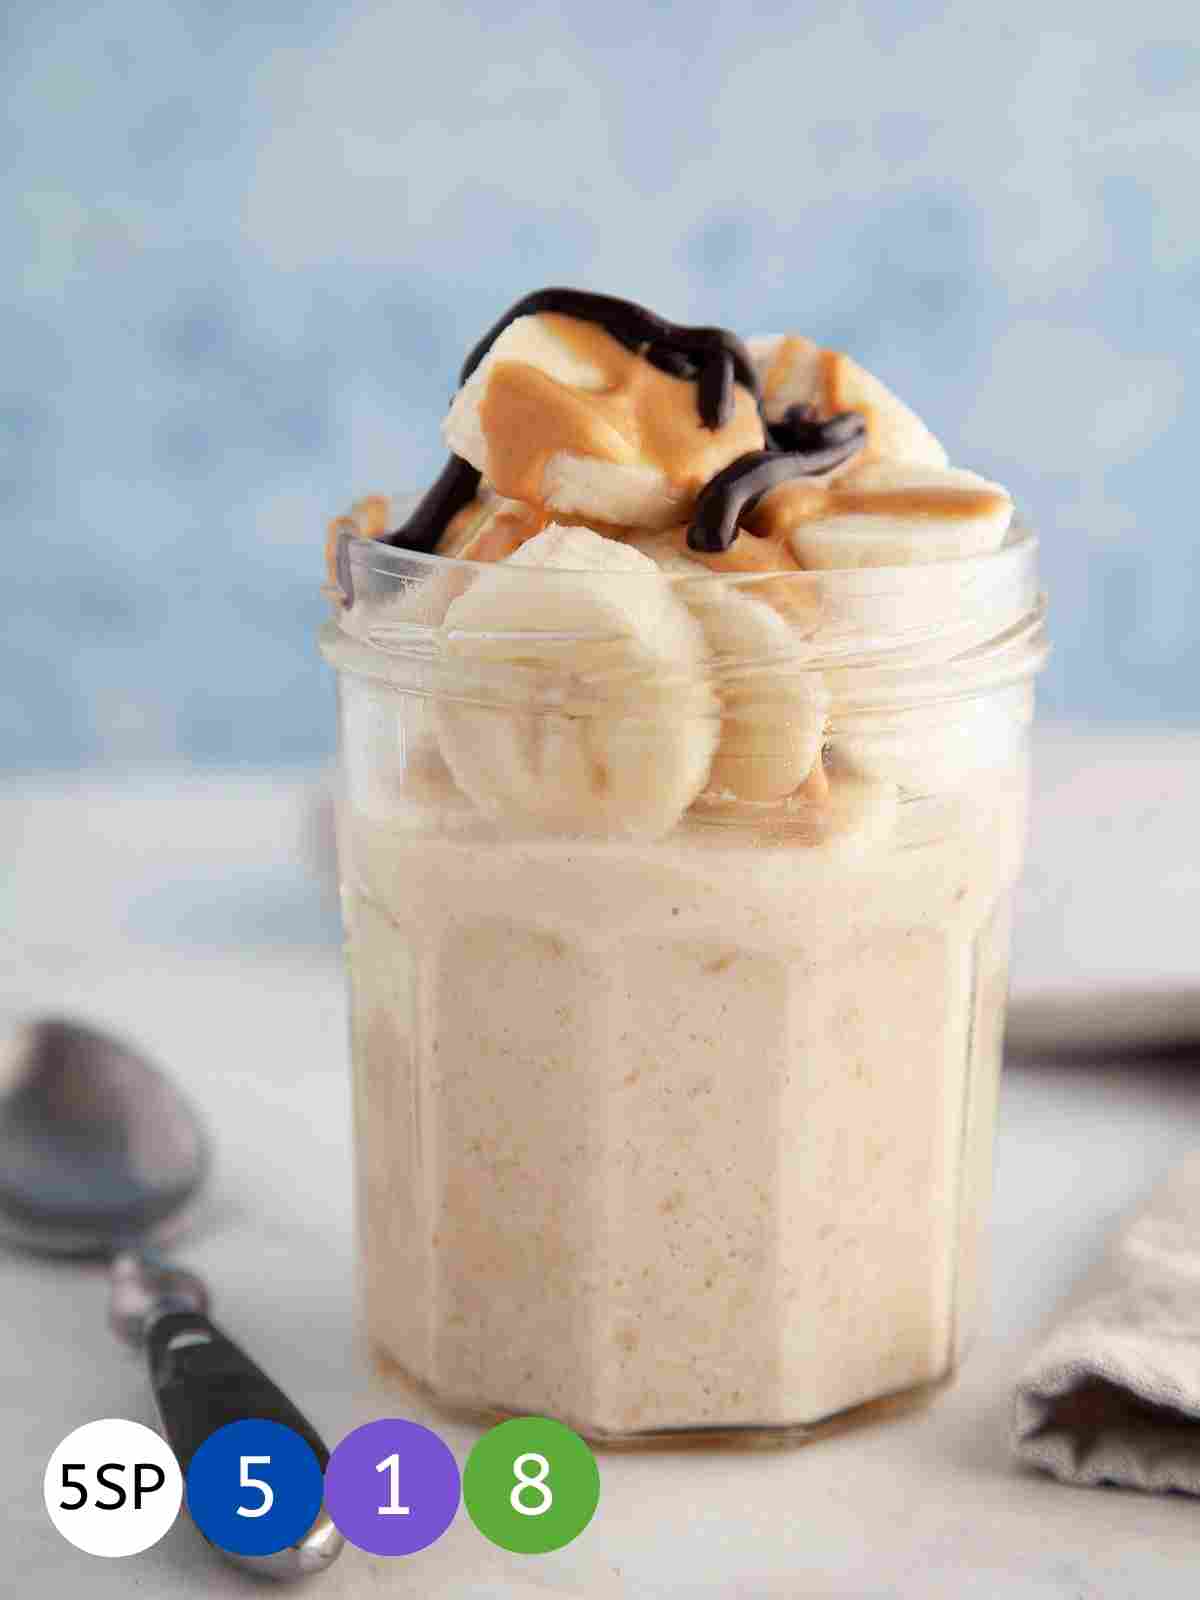 A jar full of overnight oats topped with banana